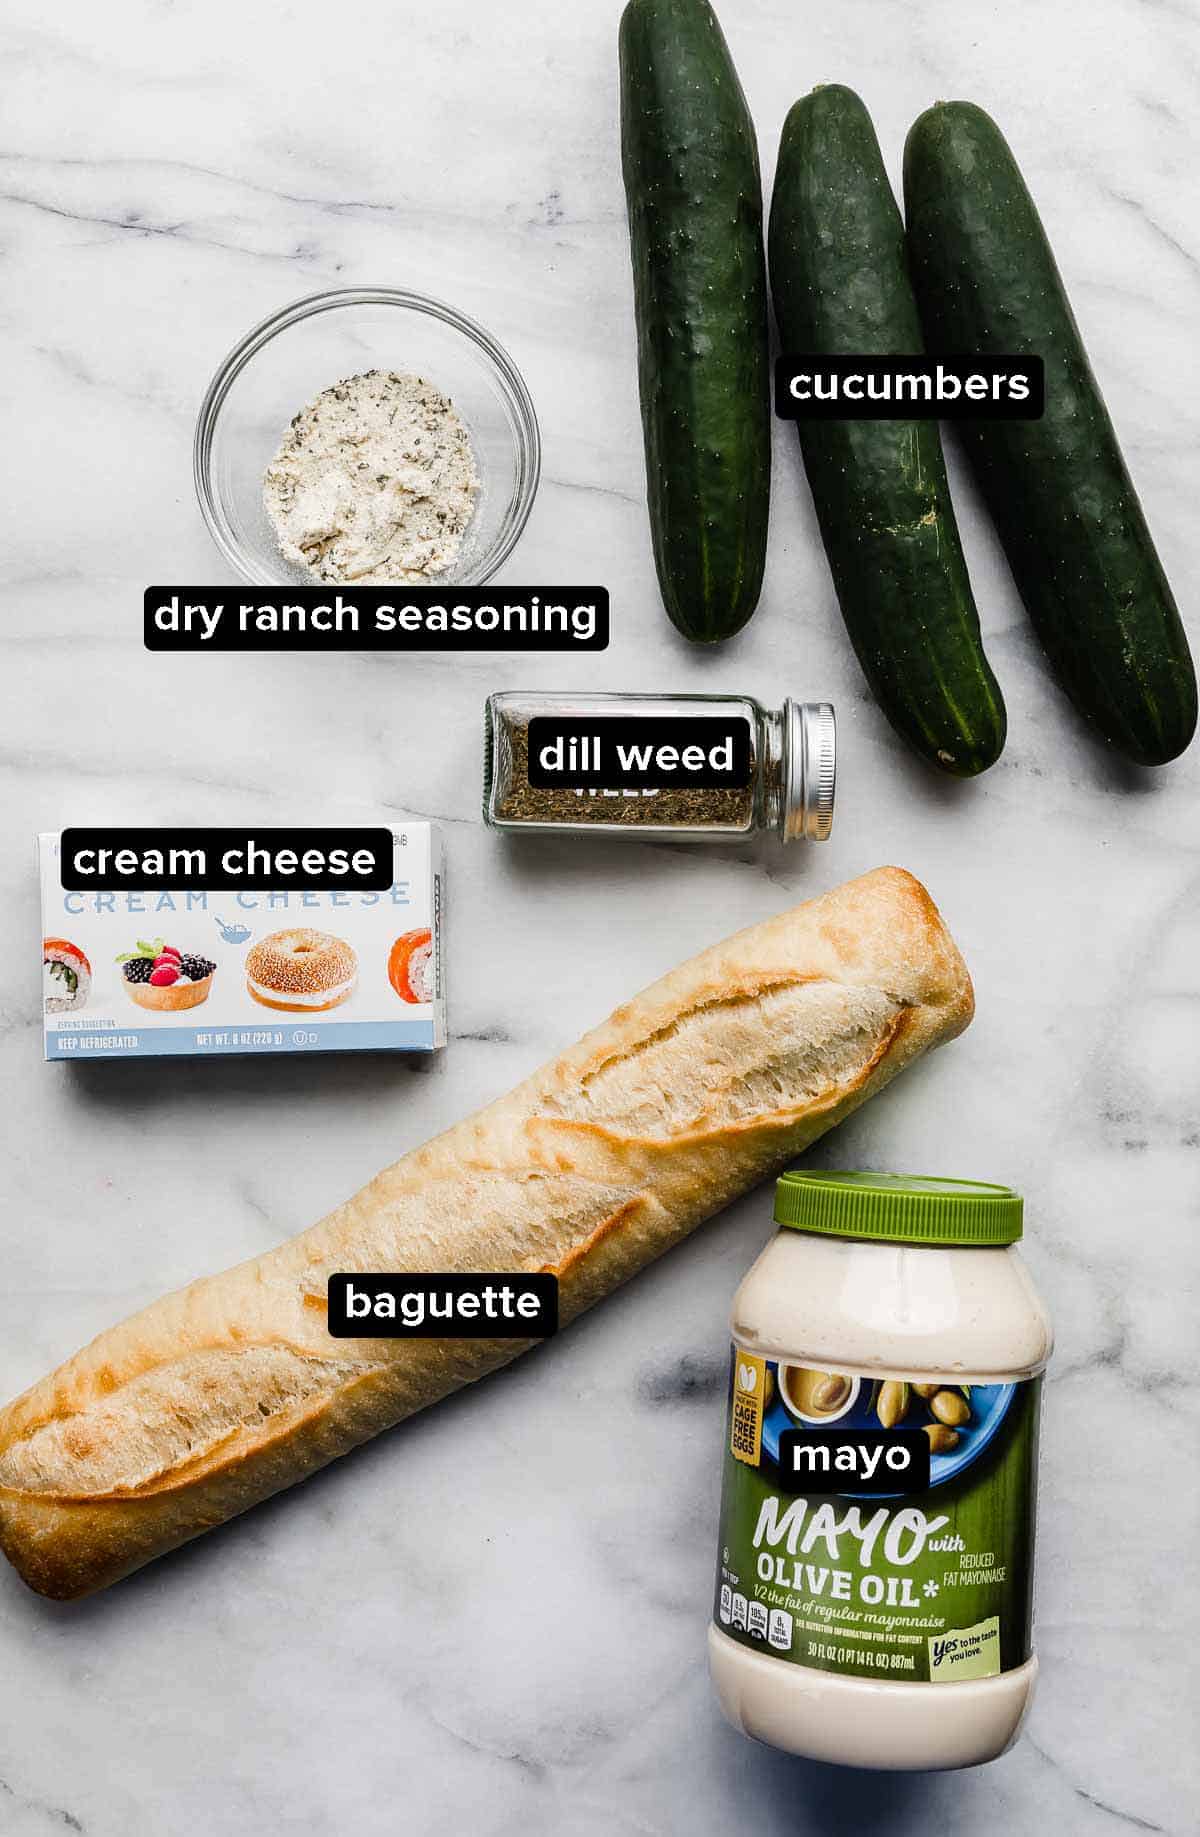 Cucumber Sandwich Appetizer ingredients on a white background: dill, cream cheese, cucumbers, baguette, and mayo.